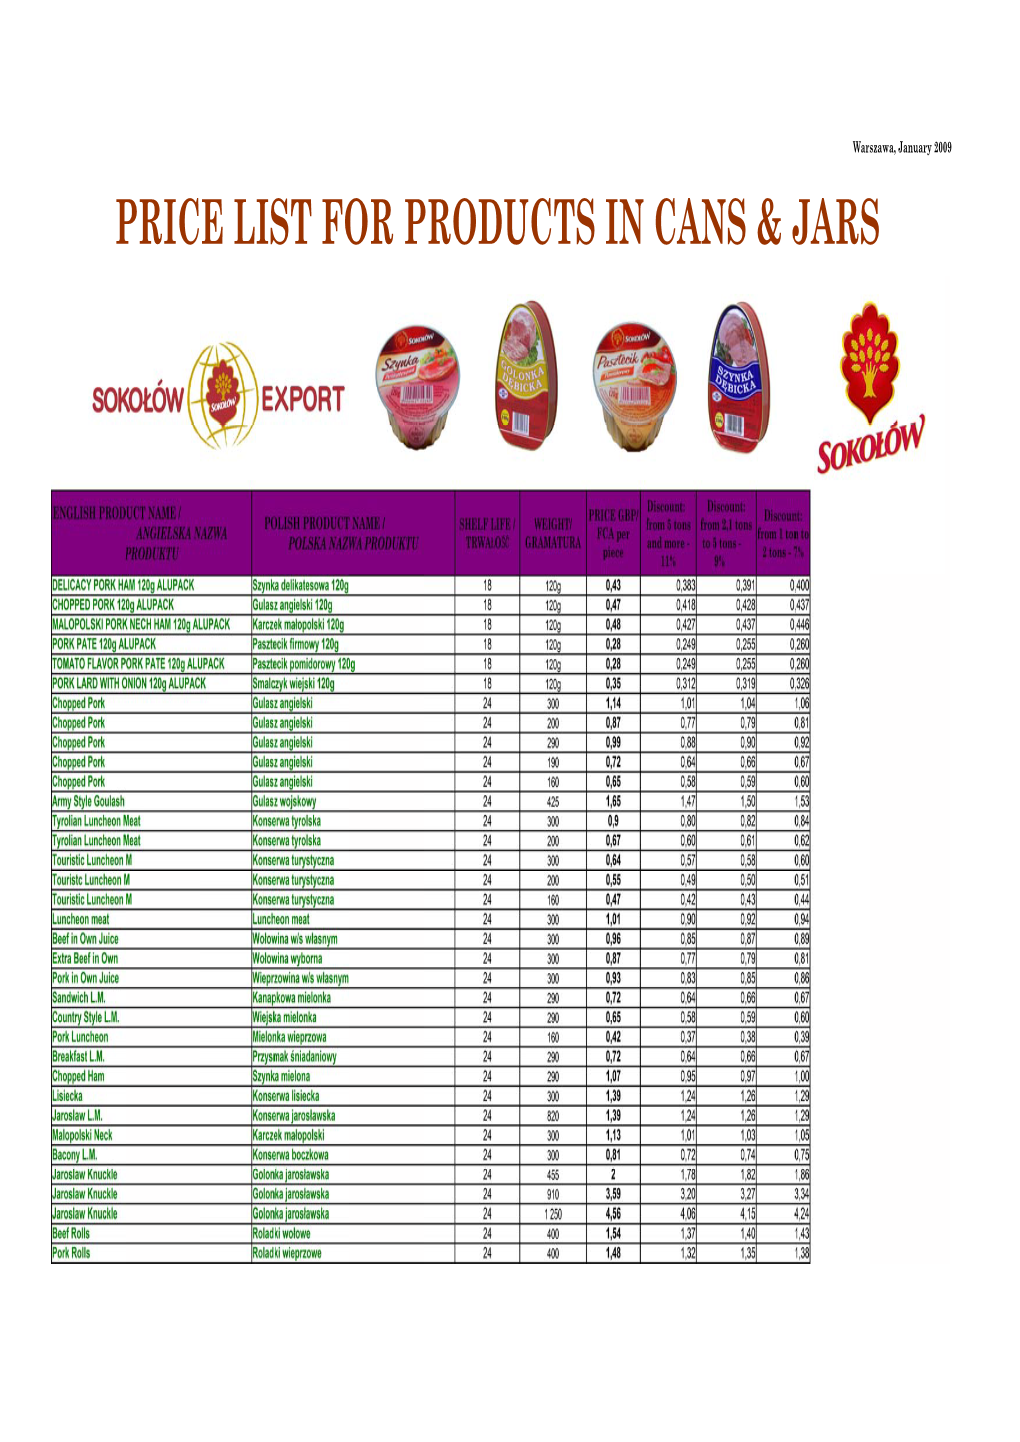 Price List for Products in Cans & Jars